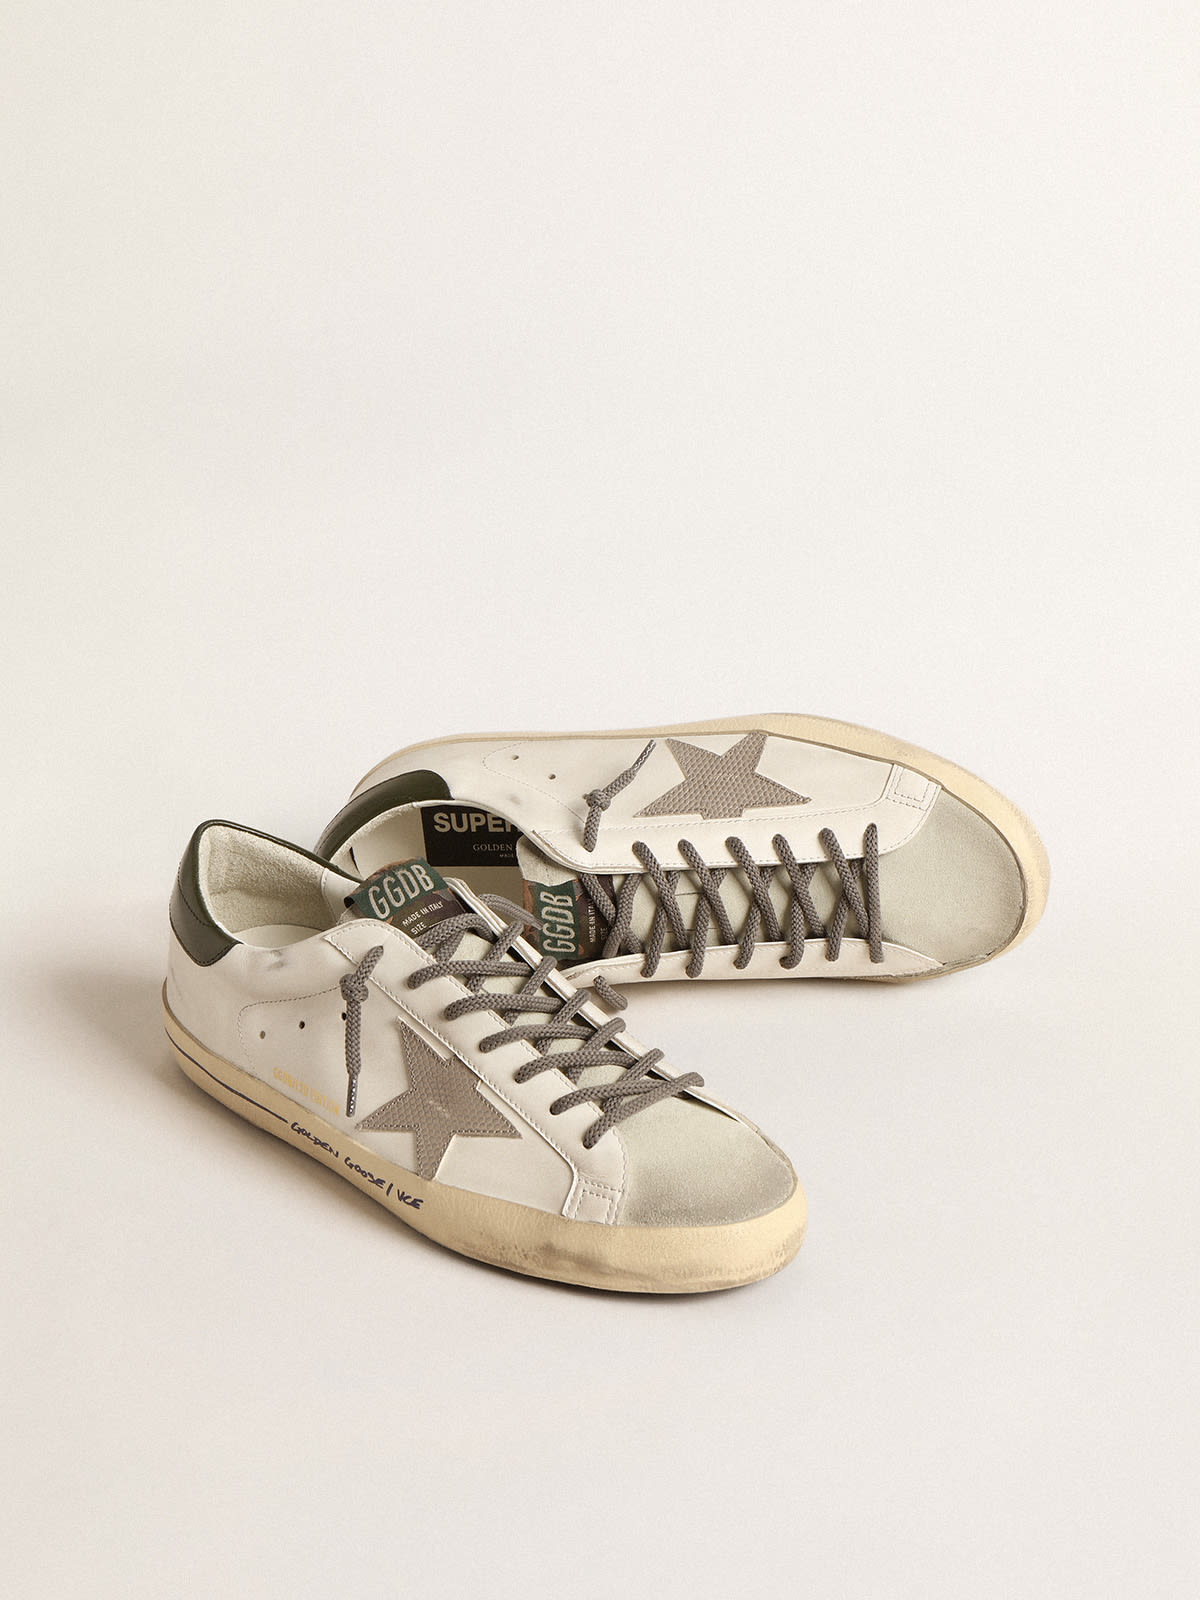 Golden Goose - Super-Star LTD with croc-print star and green heel tab in 